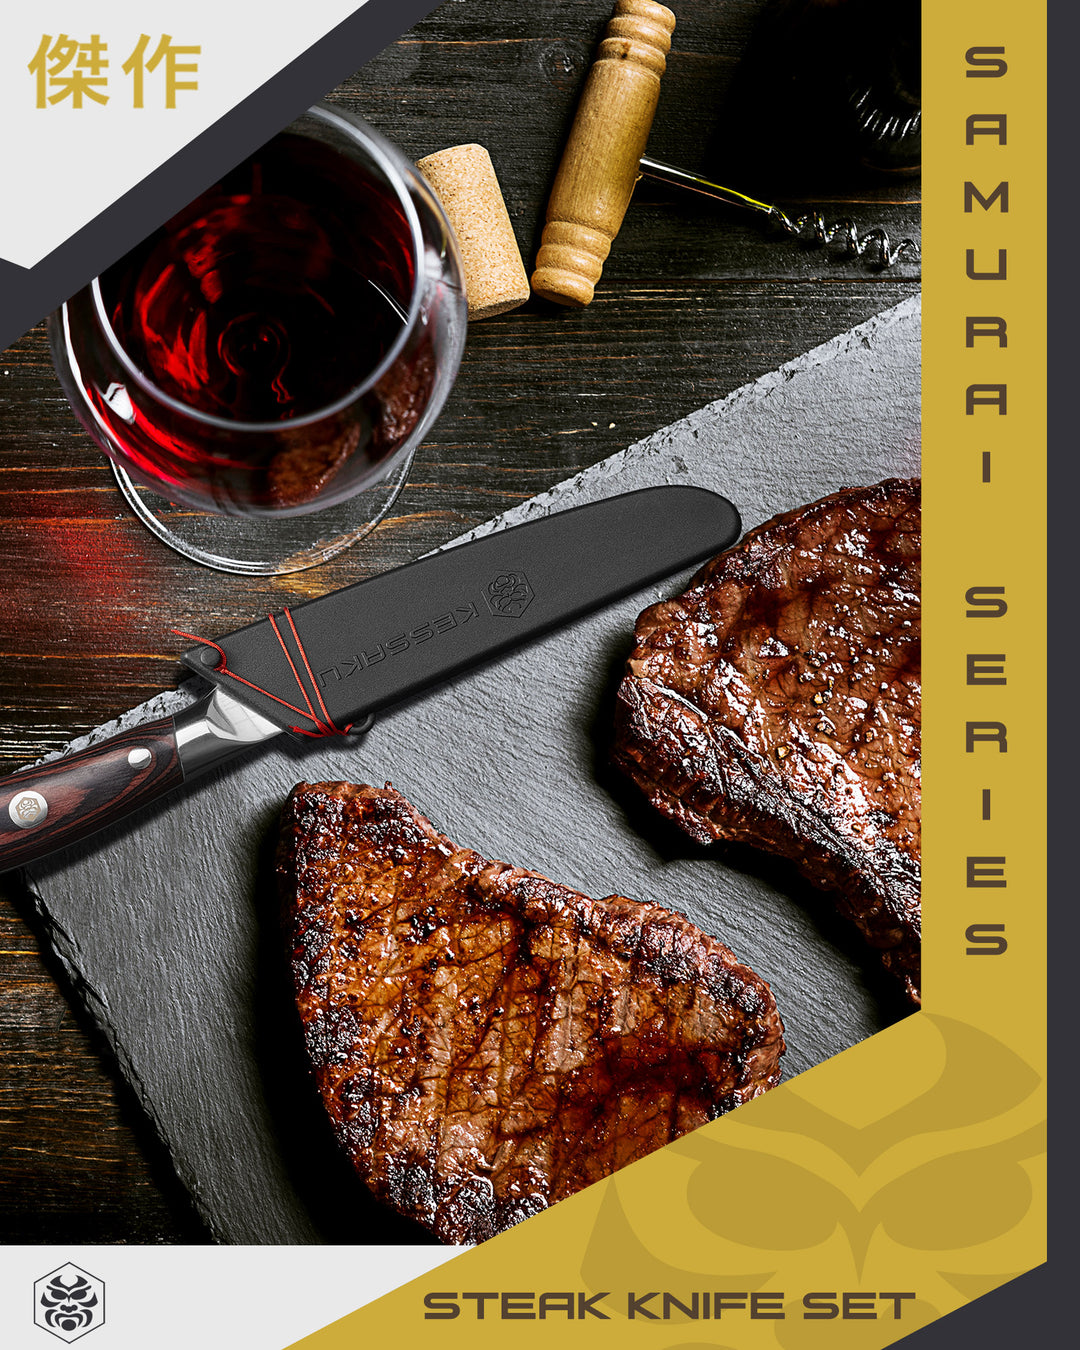 The Samurai Series Steak Knife in its locking knife sheath with steaks and a glass of wine.